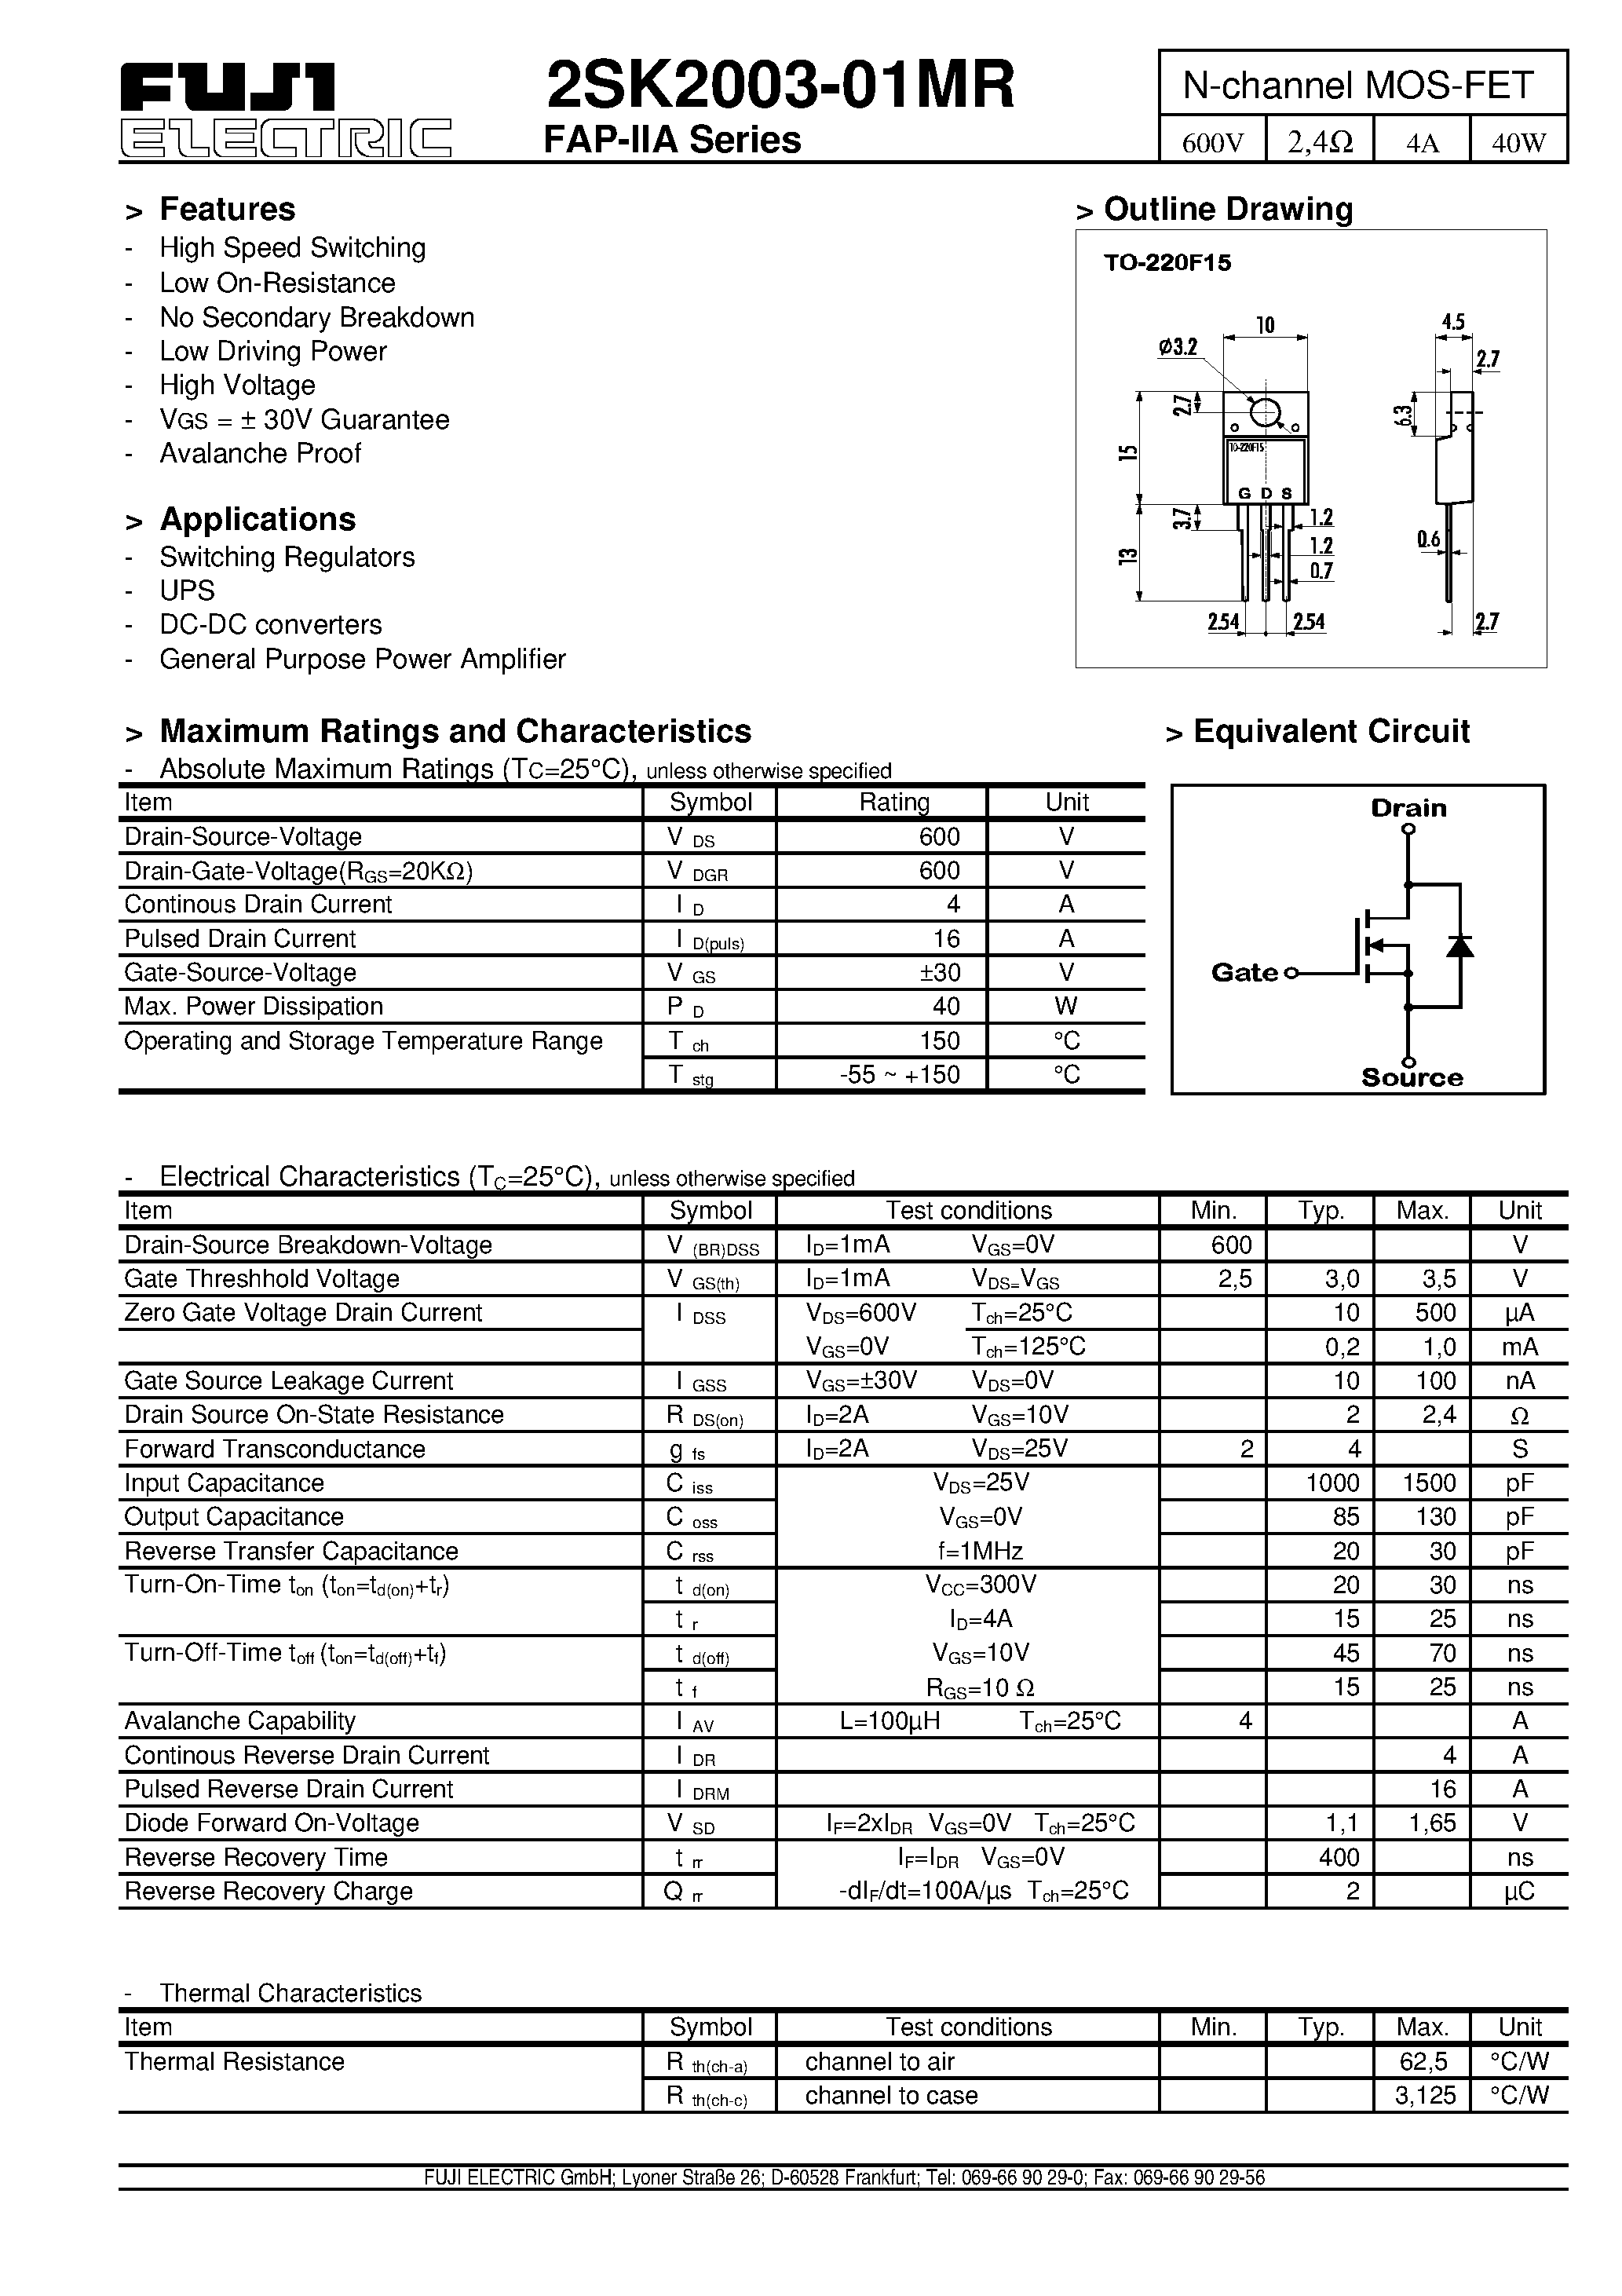 Datasheet 2SK2003-01MR - N-channel MOS-FET page 1